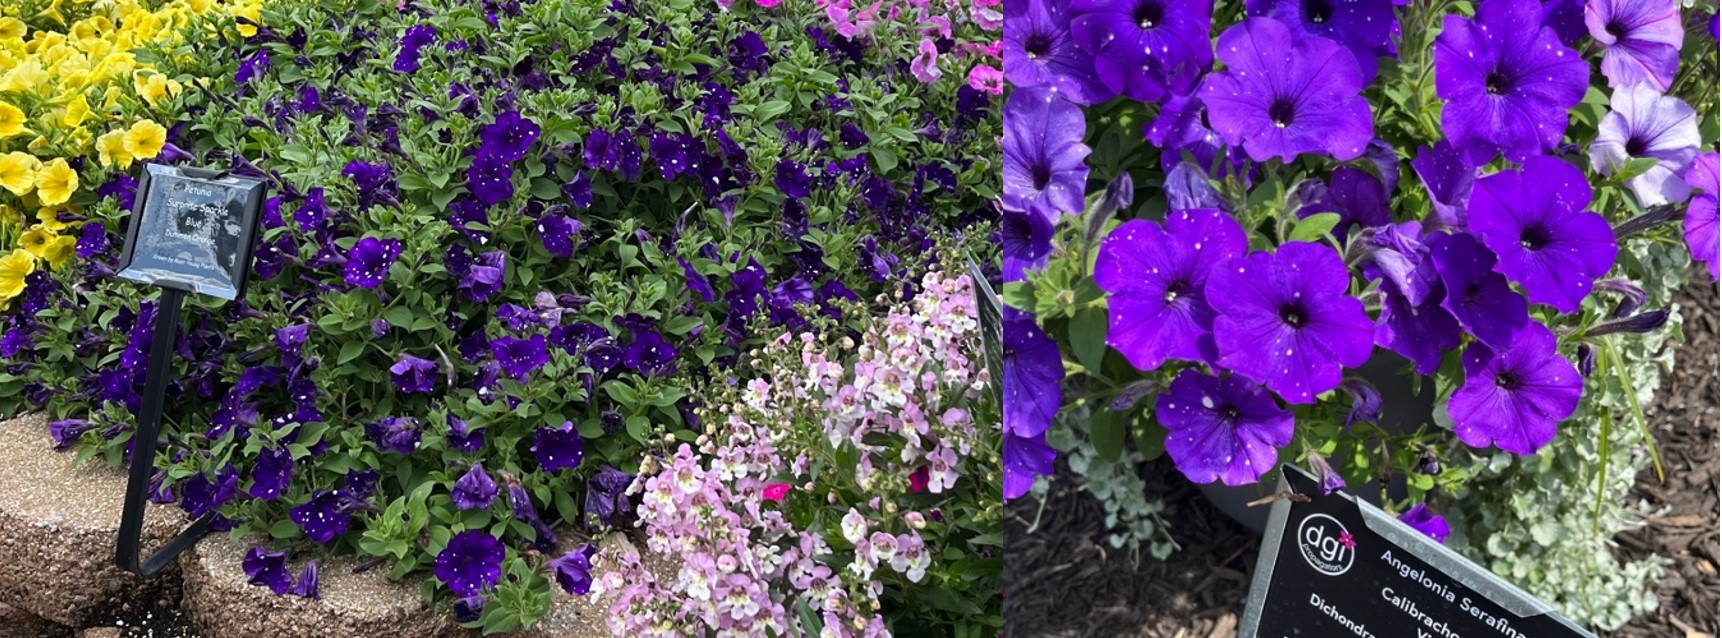 Two different petunia species.